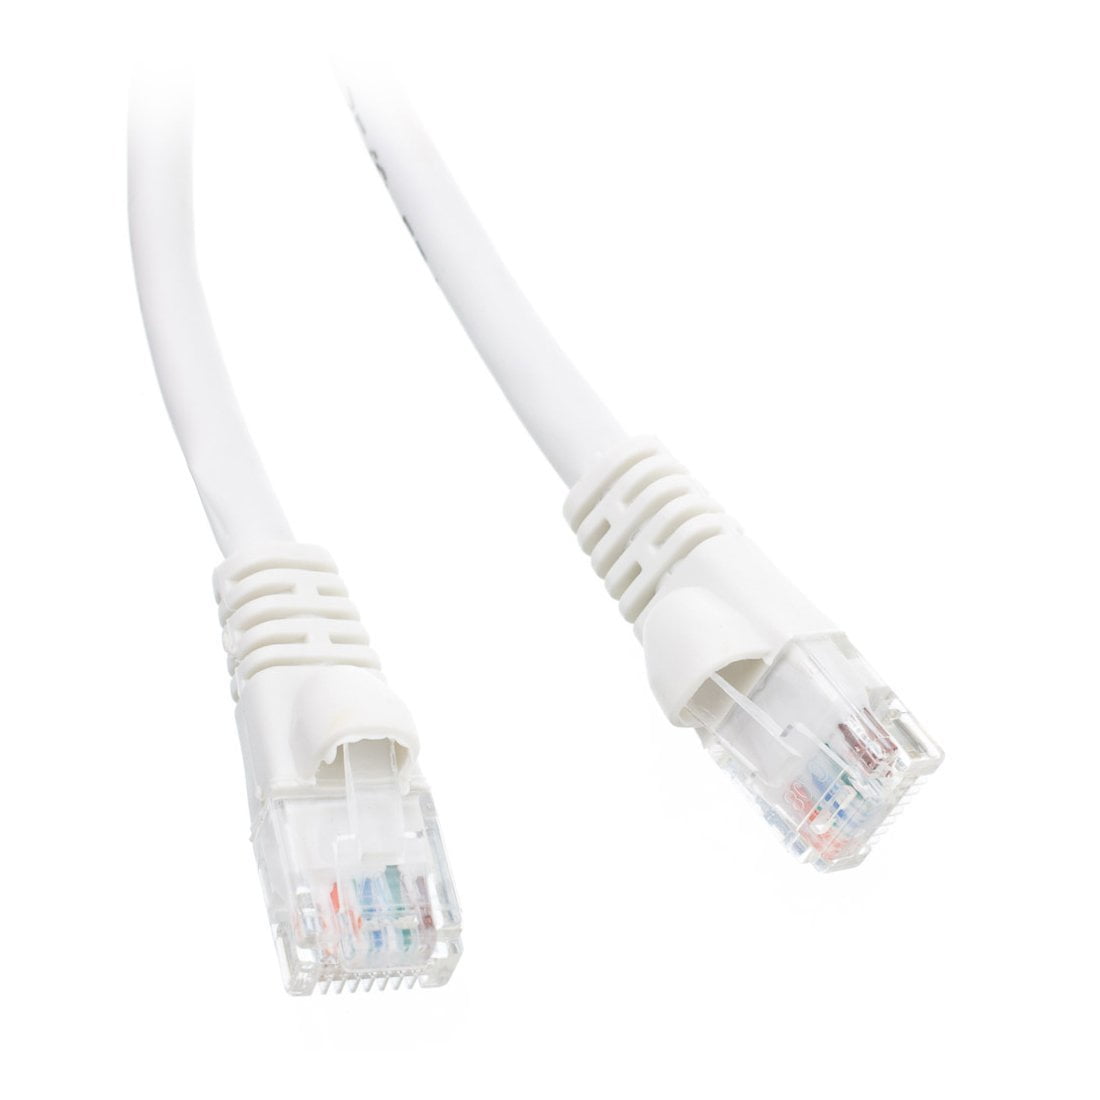 CNE477812 CAT5E Hi-Speed LAN Ethernet Patch Cable C&E 2 Pack 50 Feet White Snagless/Molded Boot 